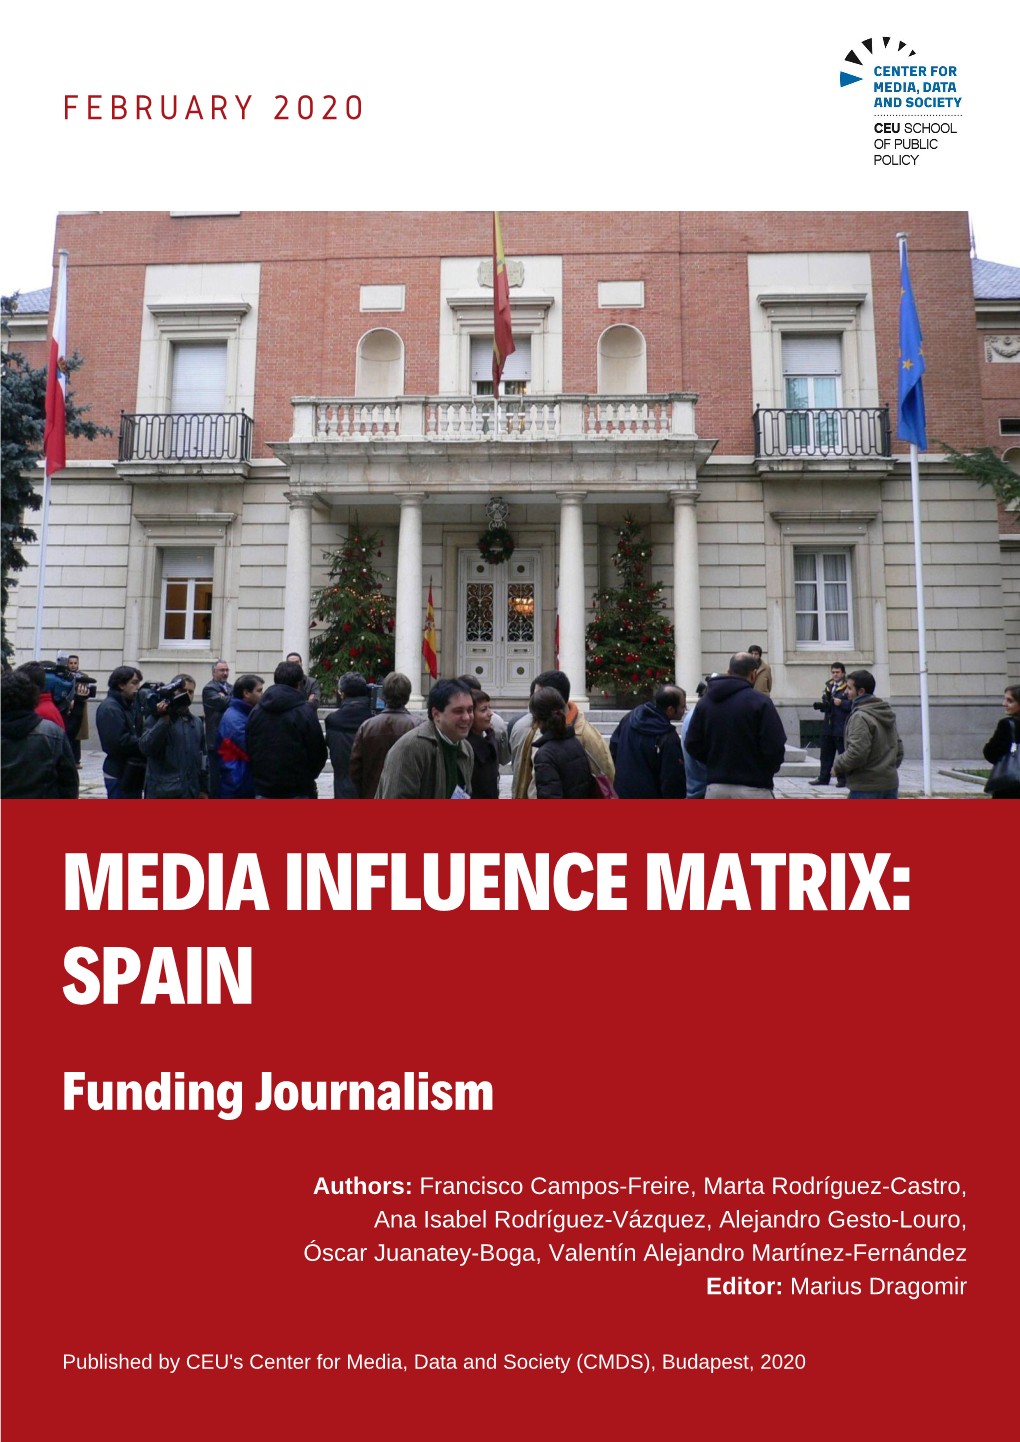 Download the Funding Chapter of the Media Influence Matrix Spain Report